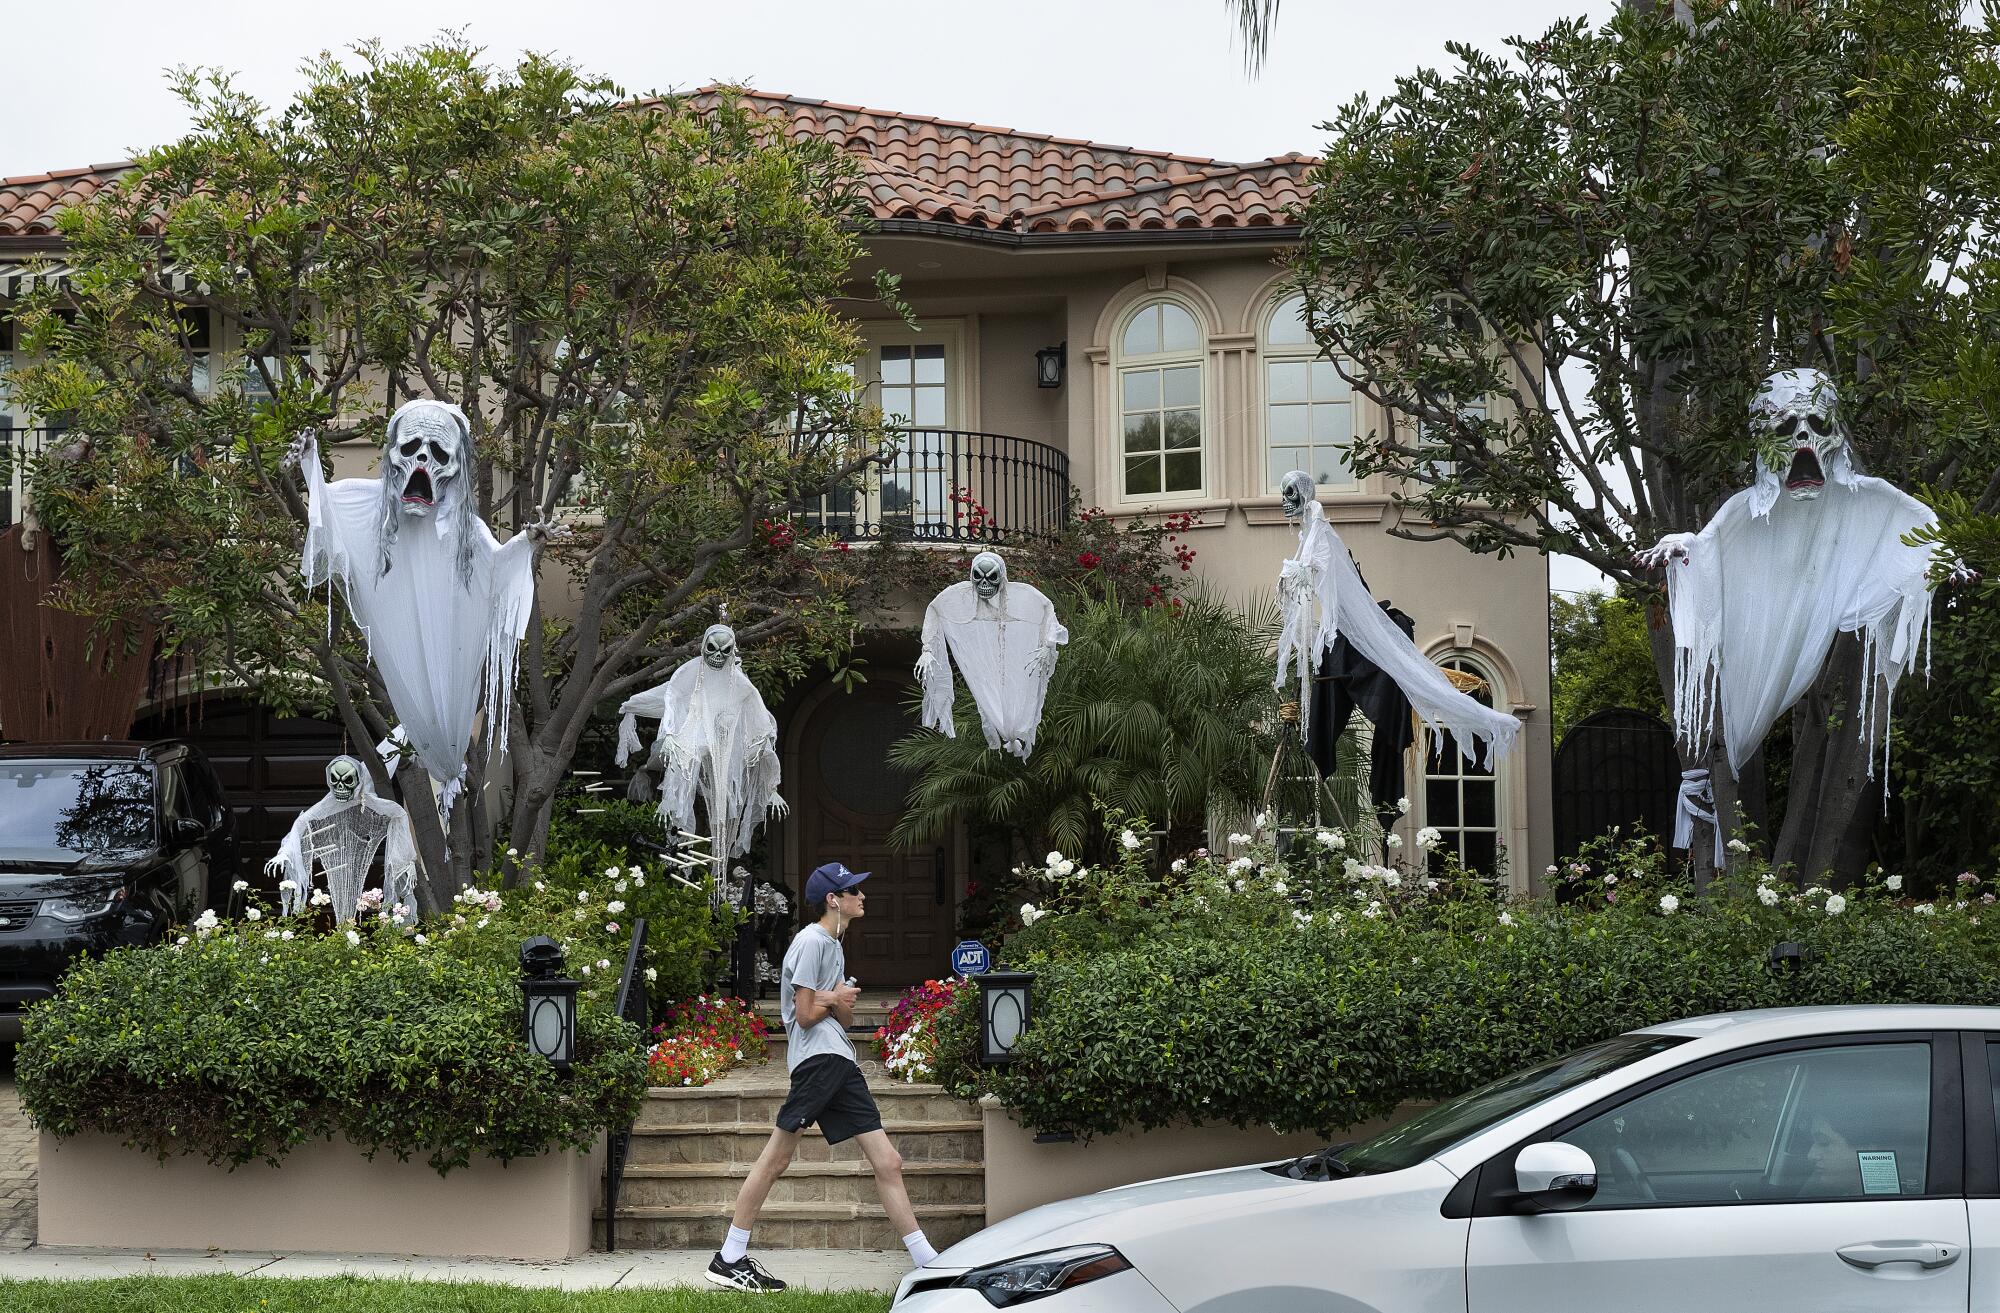 A pedestrian walks past a home with a ghostly entrance on 25th Street in Brentwood.